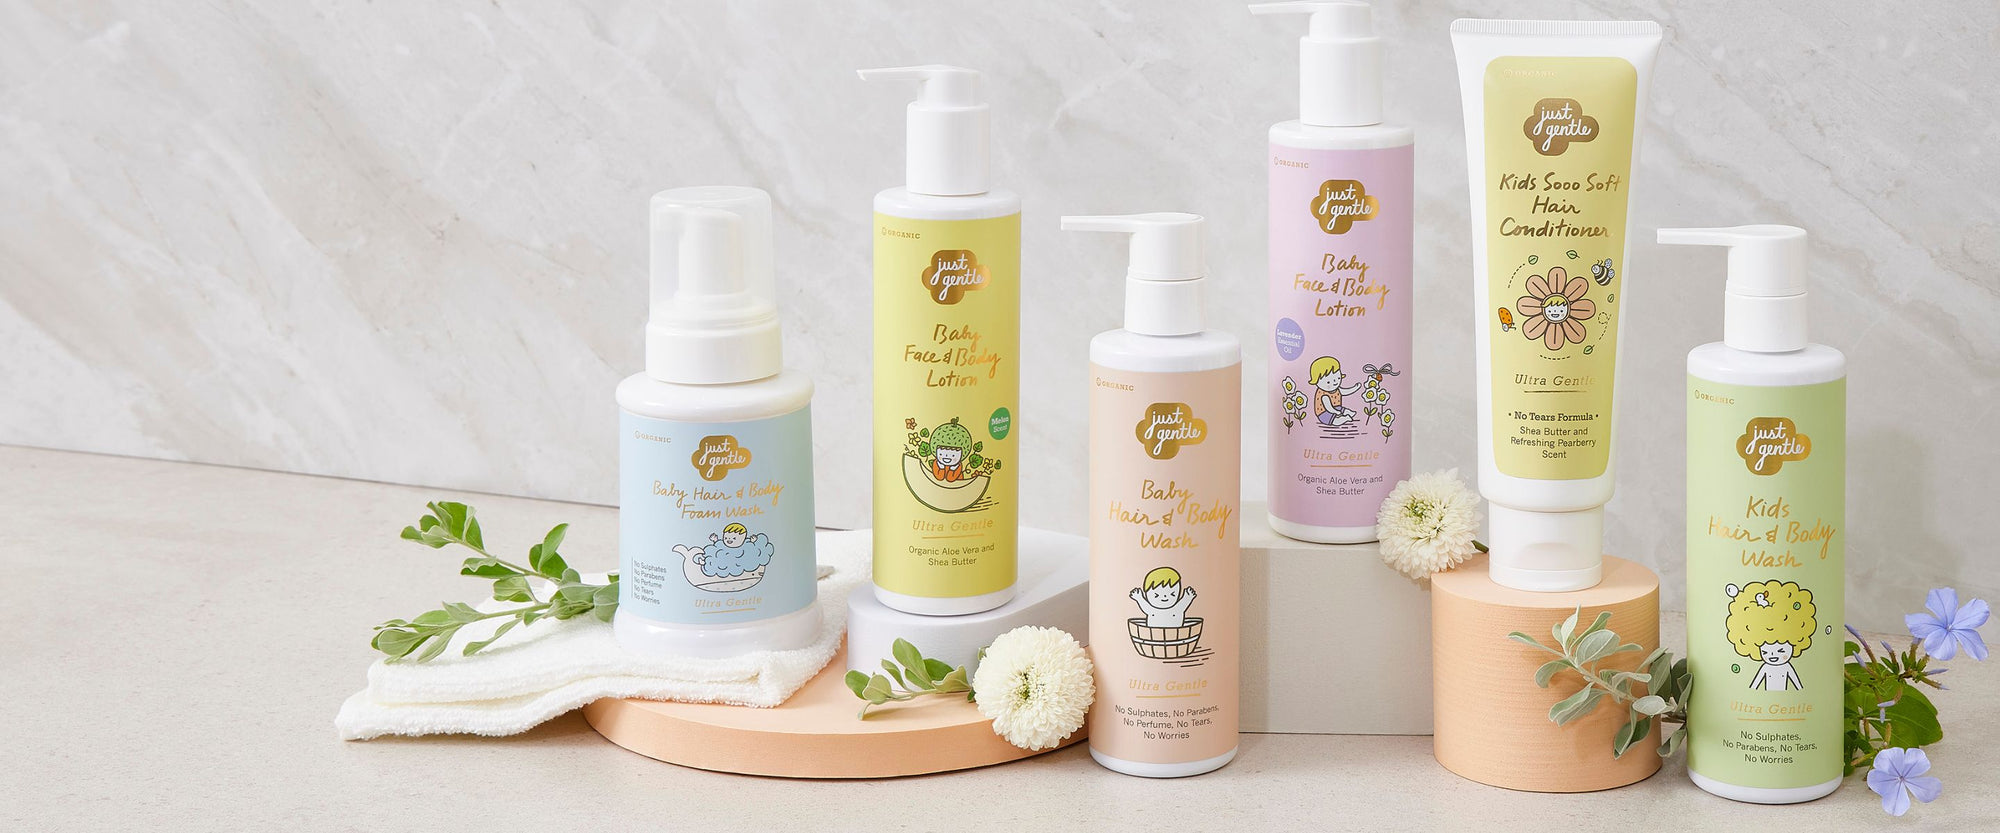 Just Gentle Organic Range of Bath and Shower Shampoos and Washes